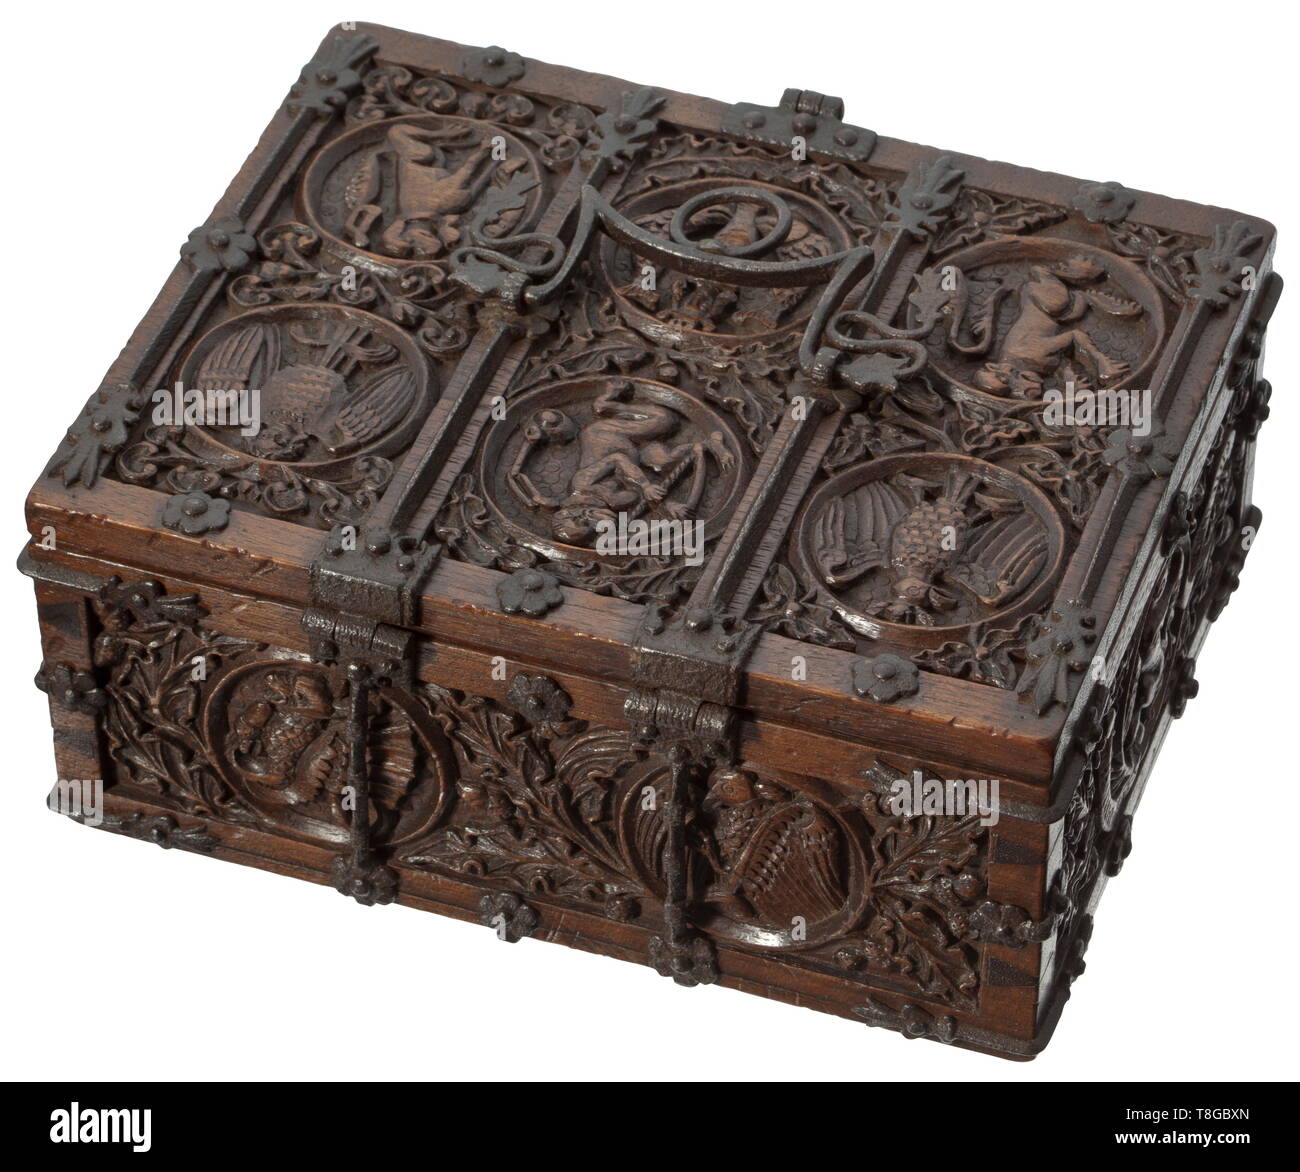 A casket in late Gothic style Oak wood, completely decorated with finest carvings, therein medallions with allegoric figurative depictions, partly with banners, iron fittings, wrought-iron carrying handle, complete with lock and key. 9 x 20 x 16 cm. Very beautiful work from the period of historicism. historic, historical, handicrafts, handcraft, craft, object, objects, stills, clipping, clippings, cut out, cut-out, cut-outs, 19th century, Additional-Rights-Clearance-Info-Not-Available Stock Photo